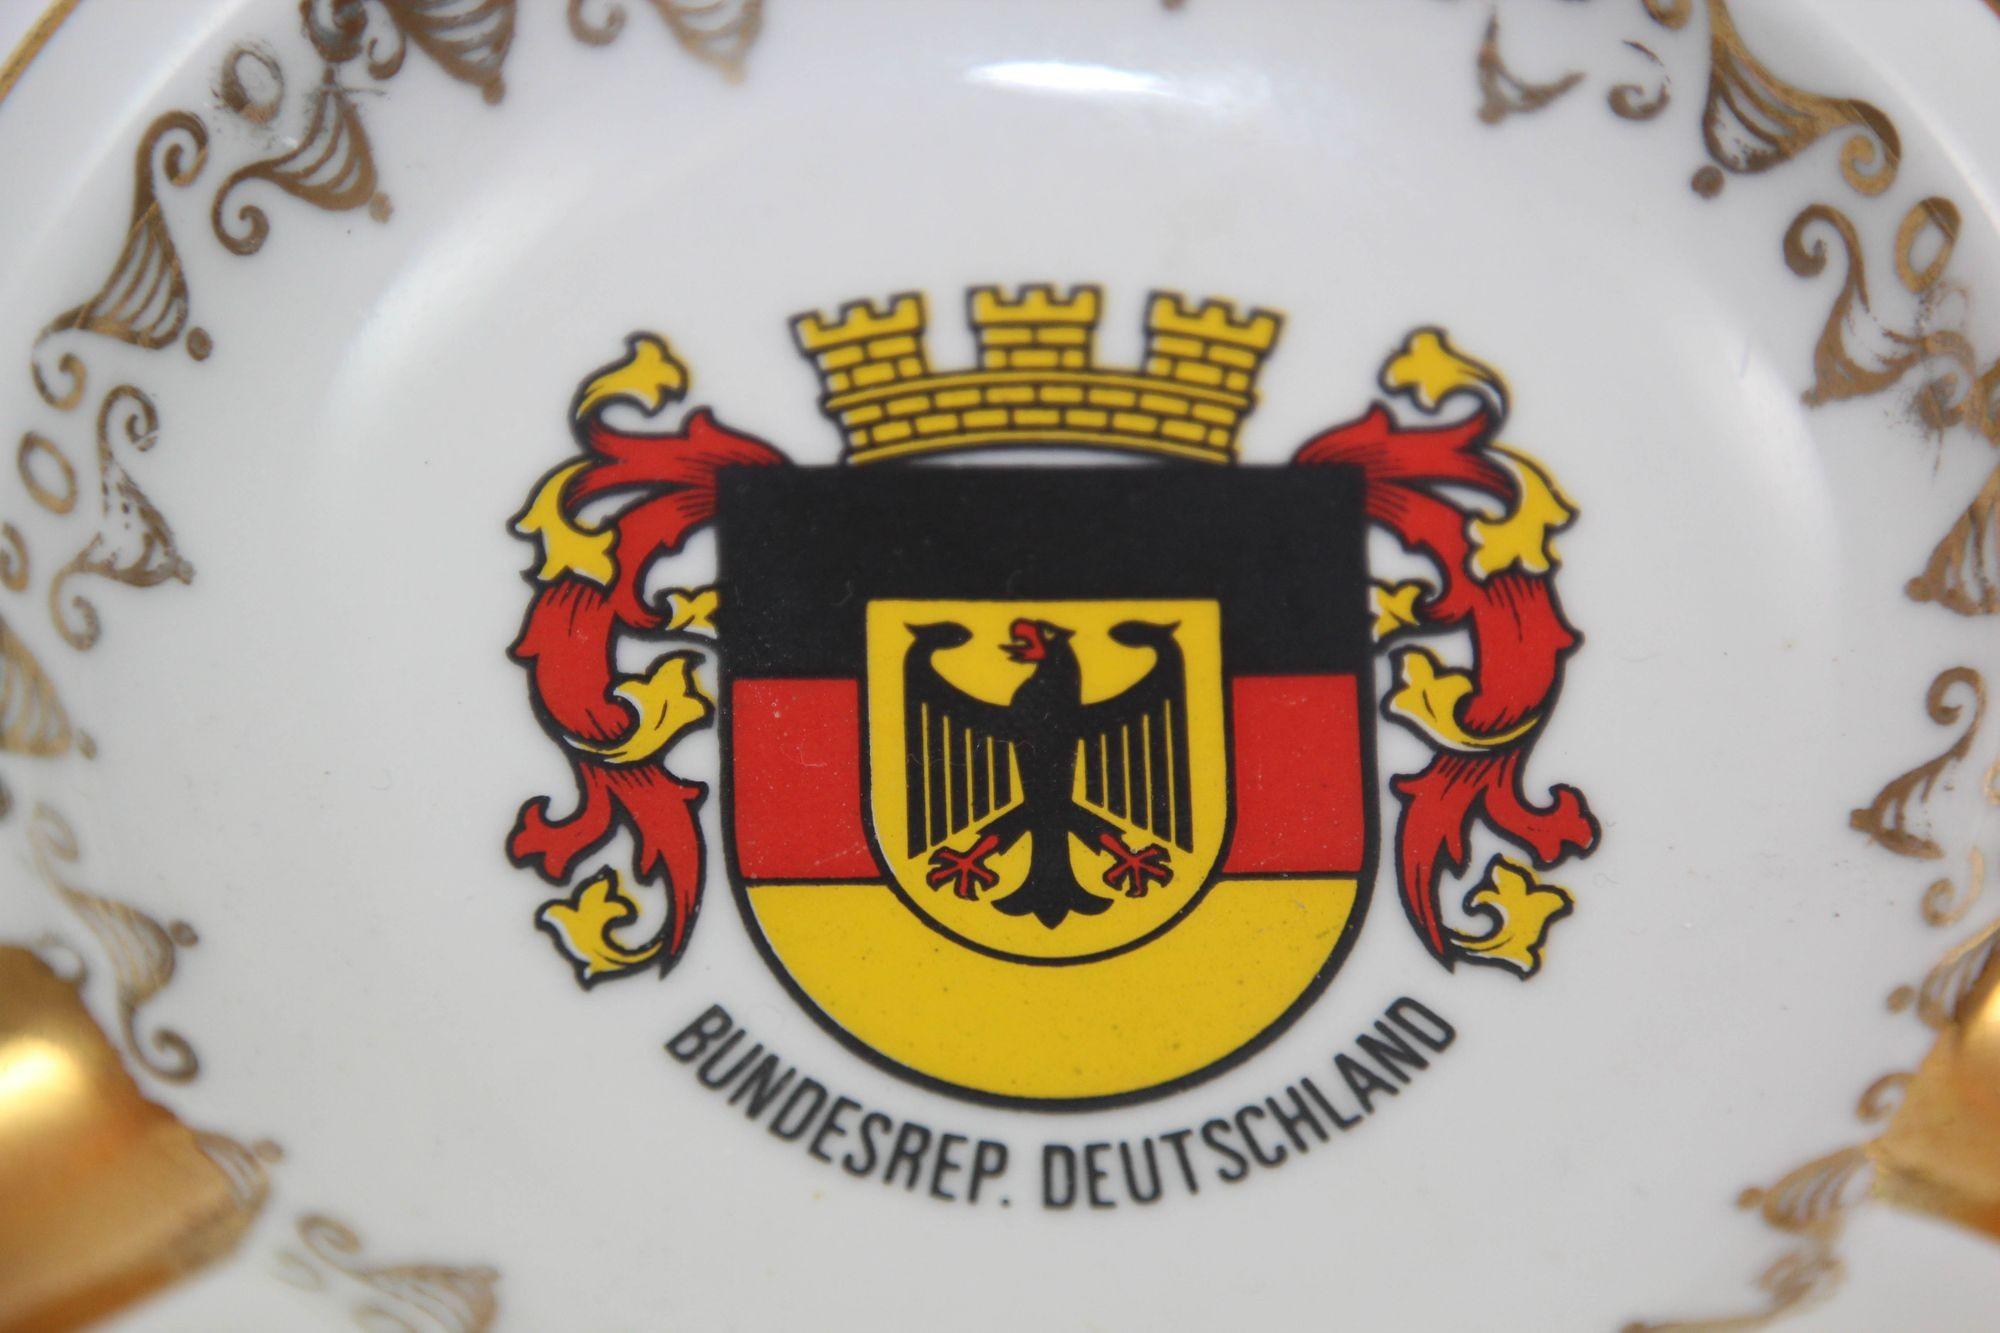 Hand-Crafted Vintage Made in Germany Souvenir Porcelain Ashtray Collectible Limited Edition For Sale